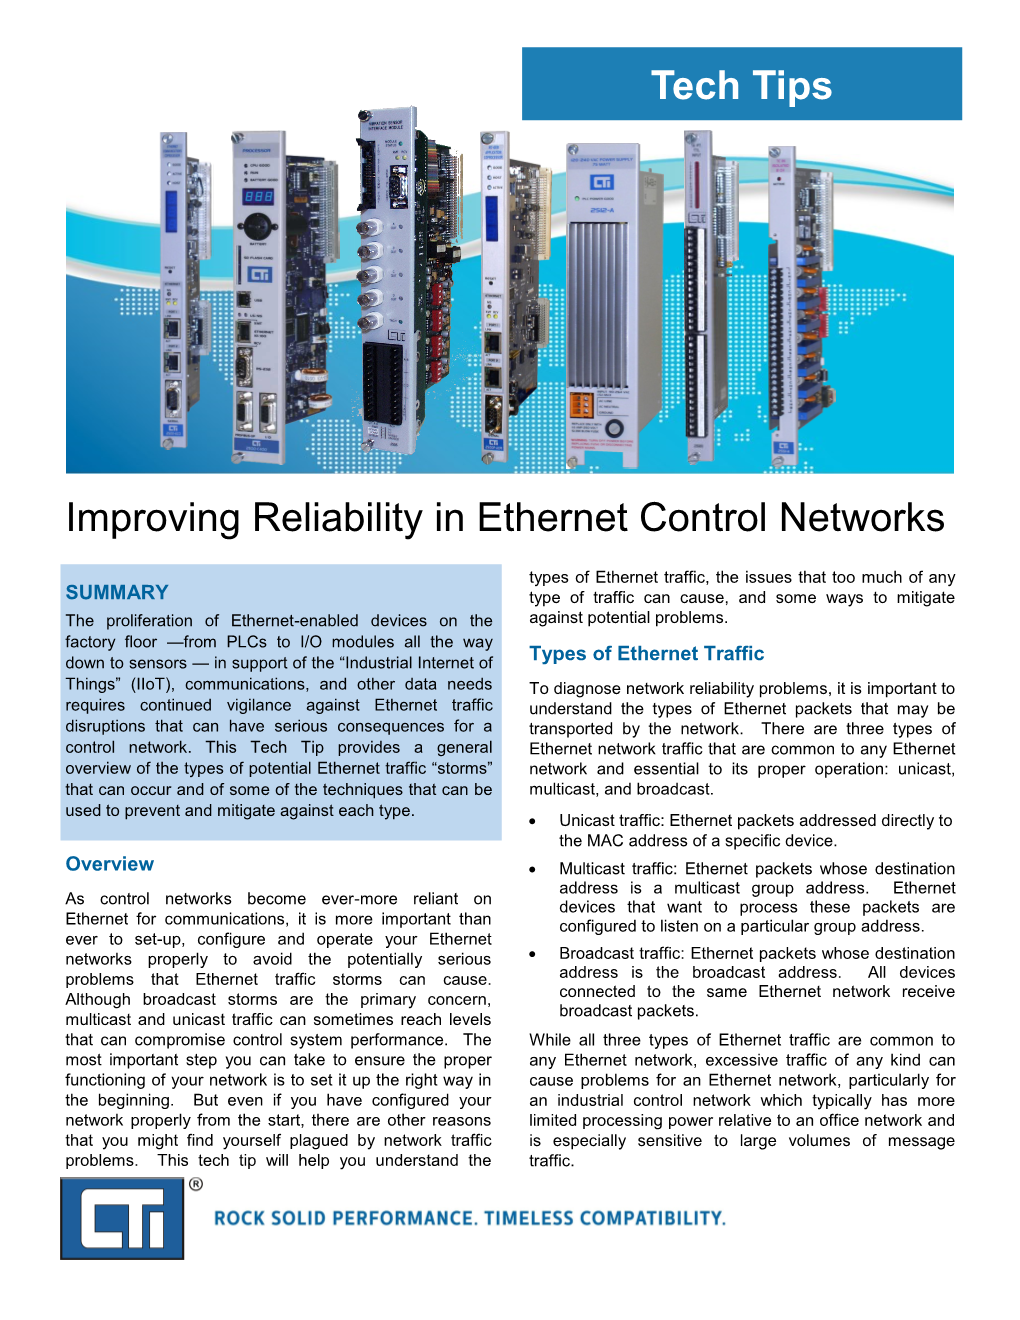 Improving Reliability in Ethernet Control Networks